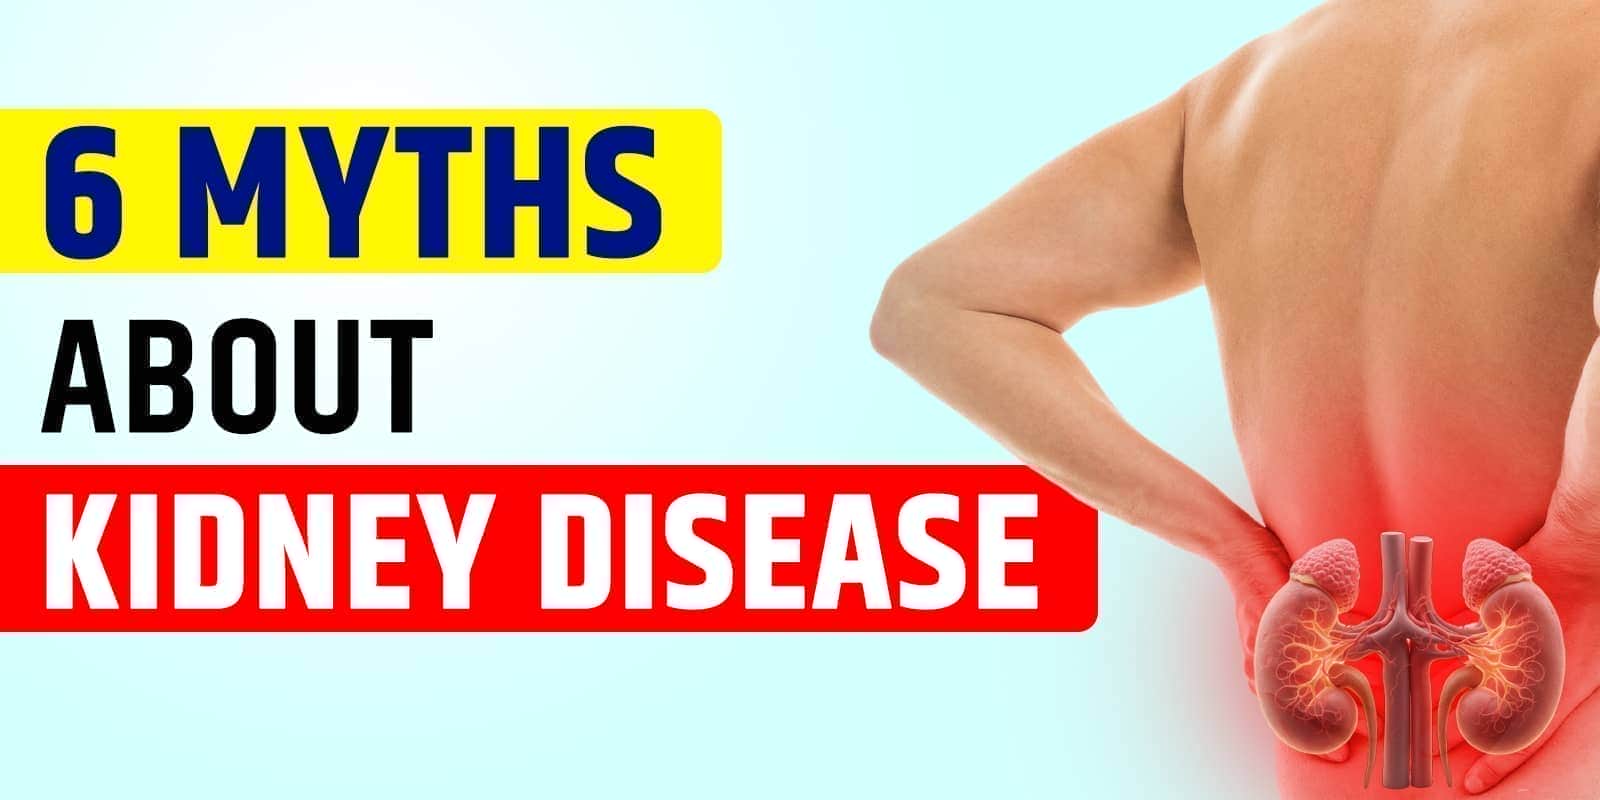 6 Myths about Kidney Disease